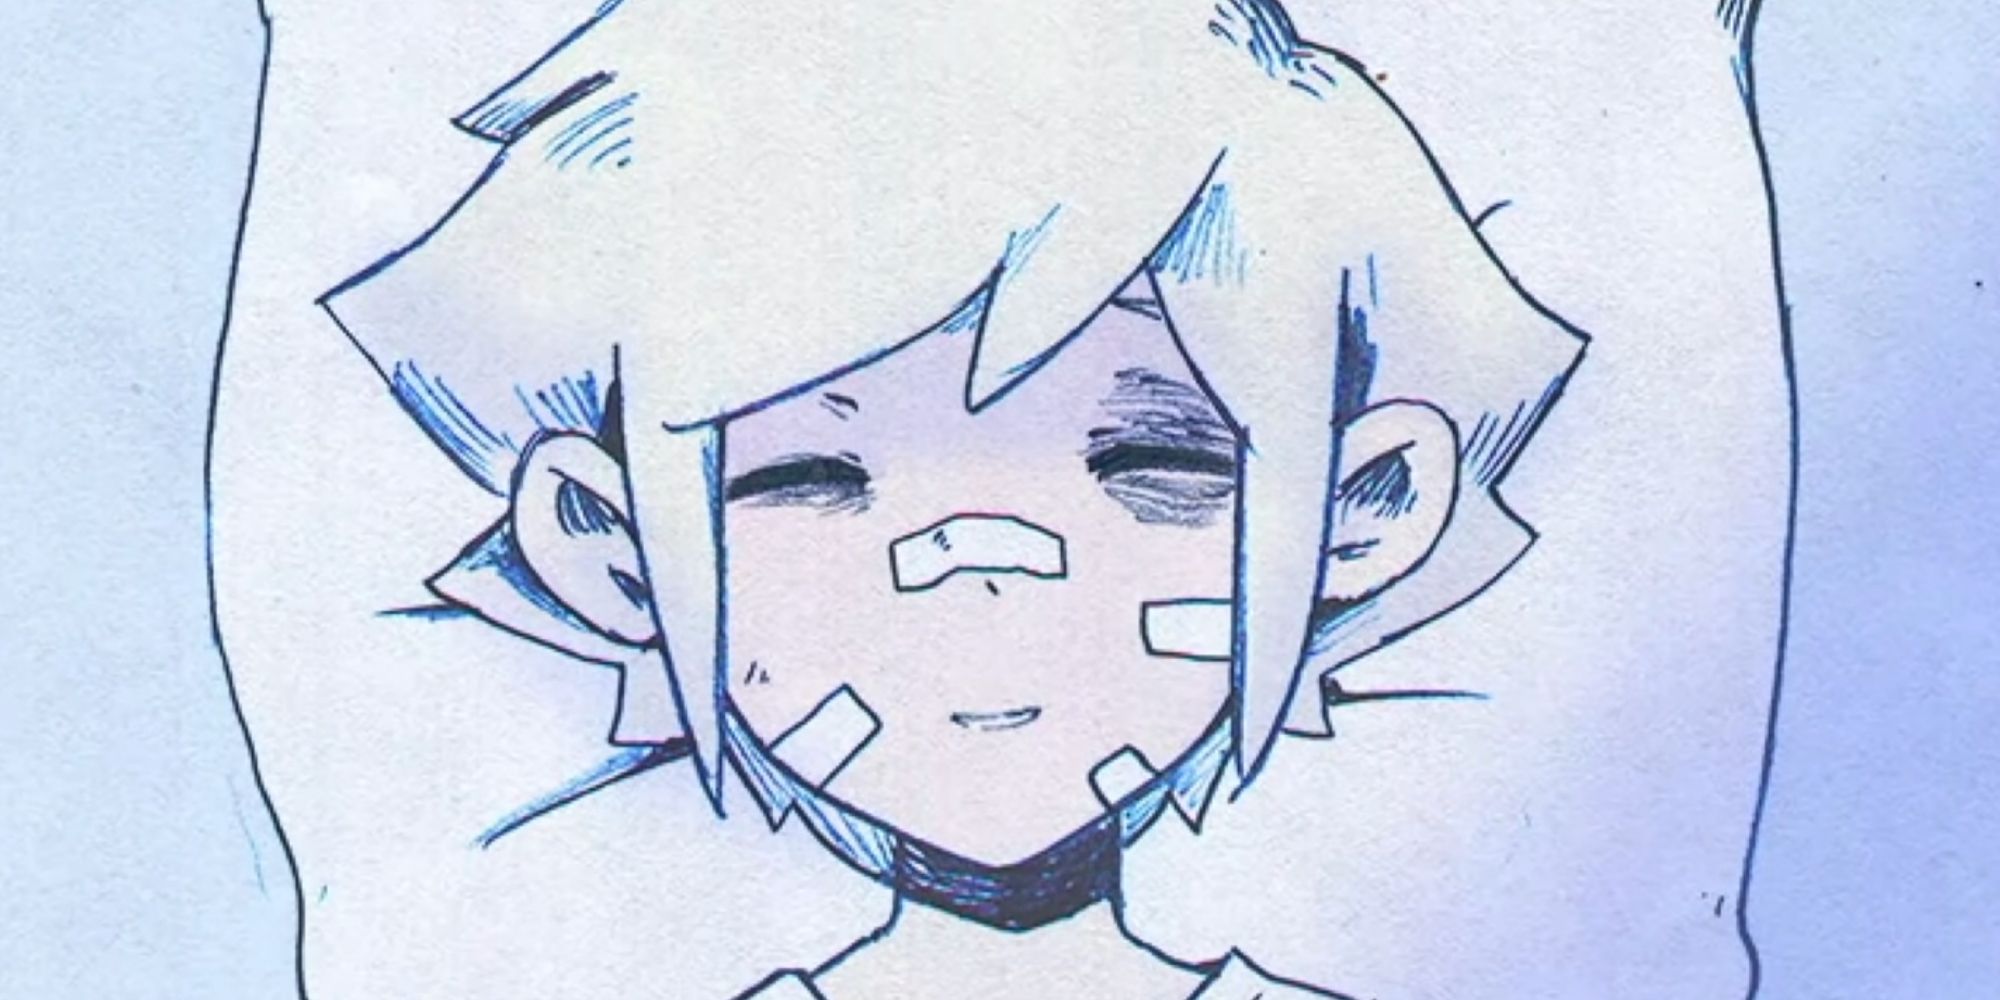 A screenshot from the Secret Ending of Omori, showing Basil smiling at Sunny from his hospital bed